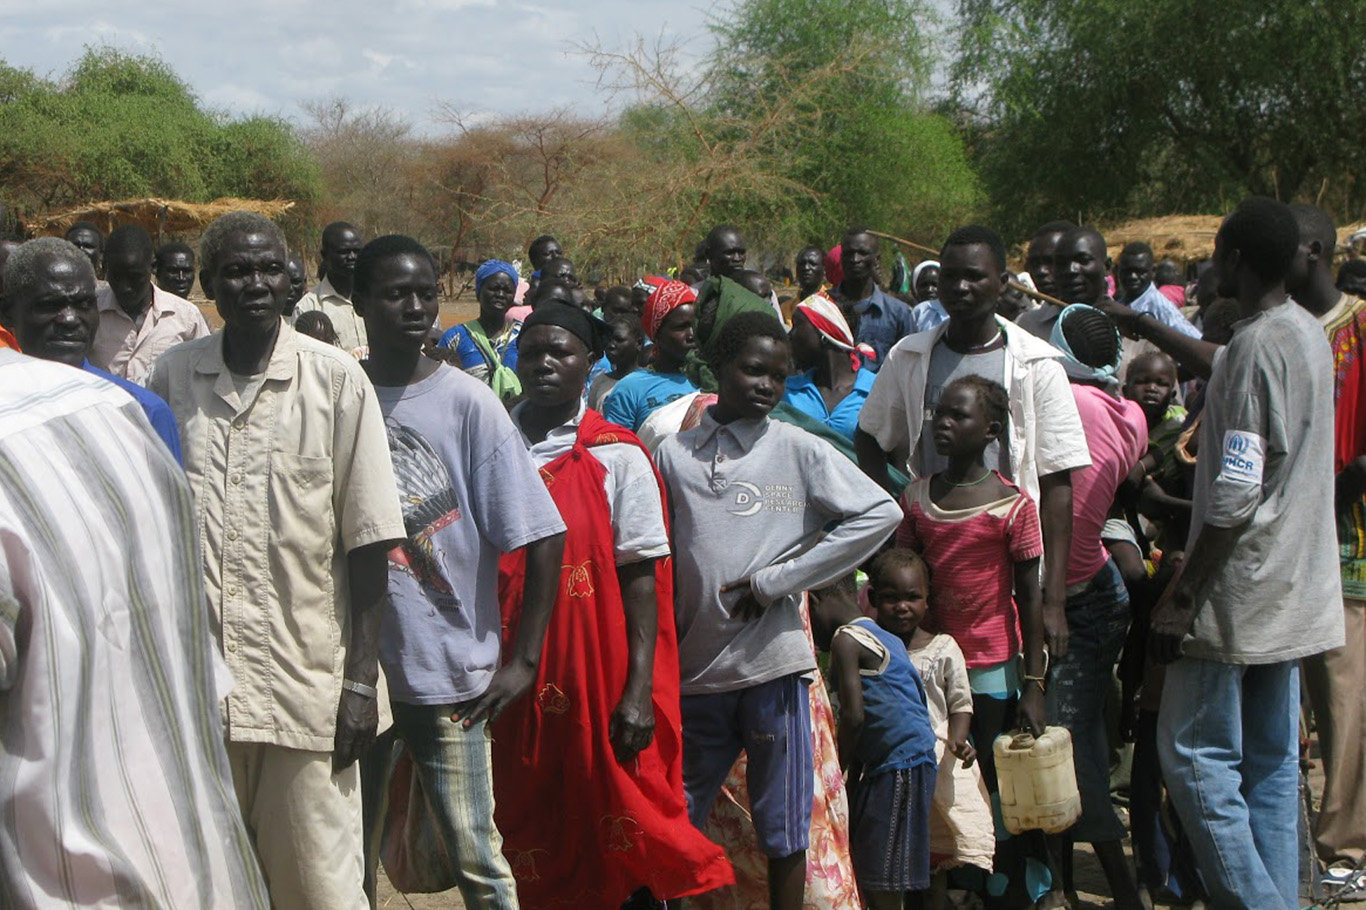 About 40,000 people displaced following fresh clashes in South Sudan, UN says